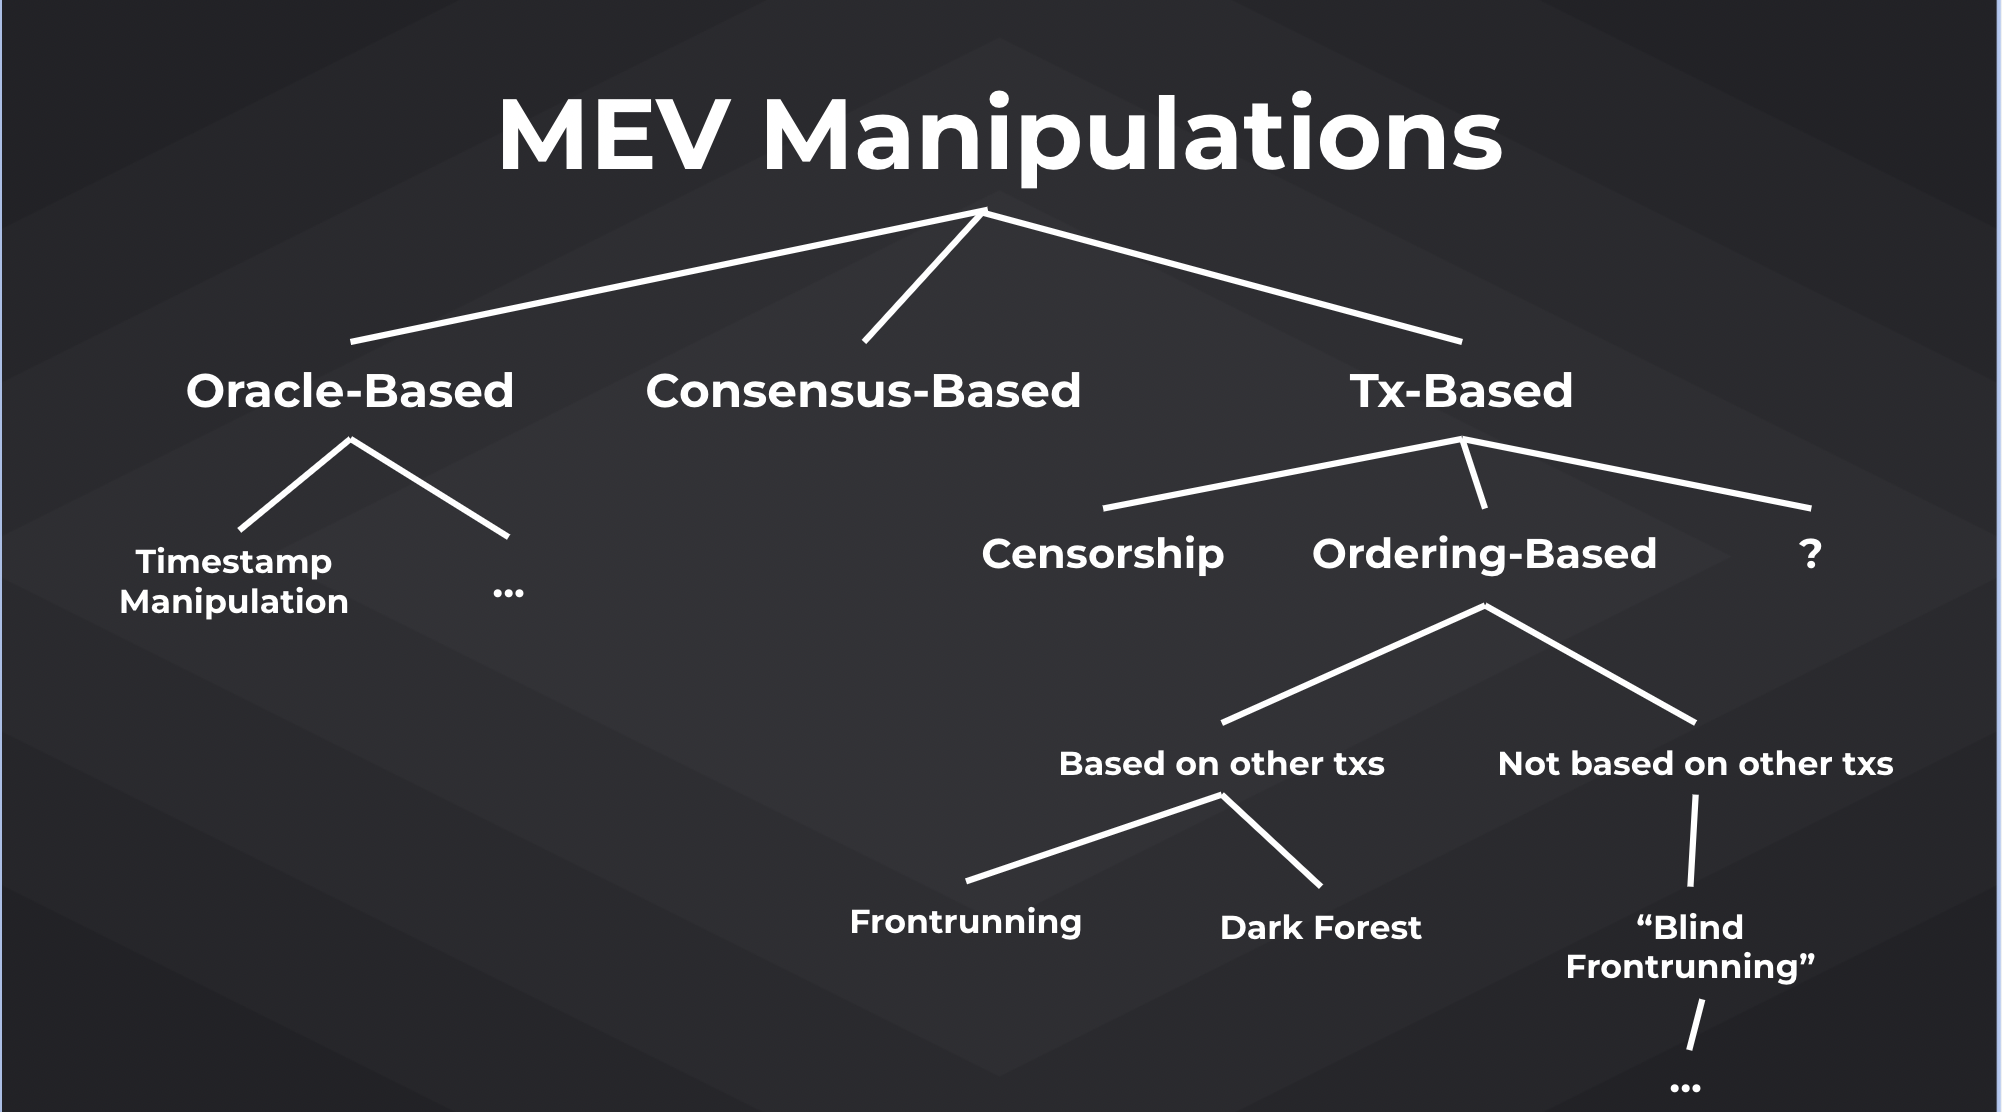 mev crypto meaning